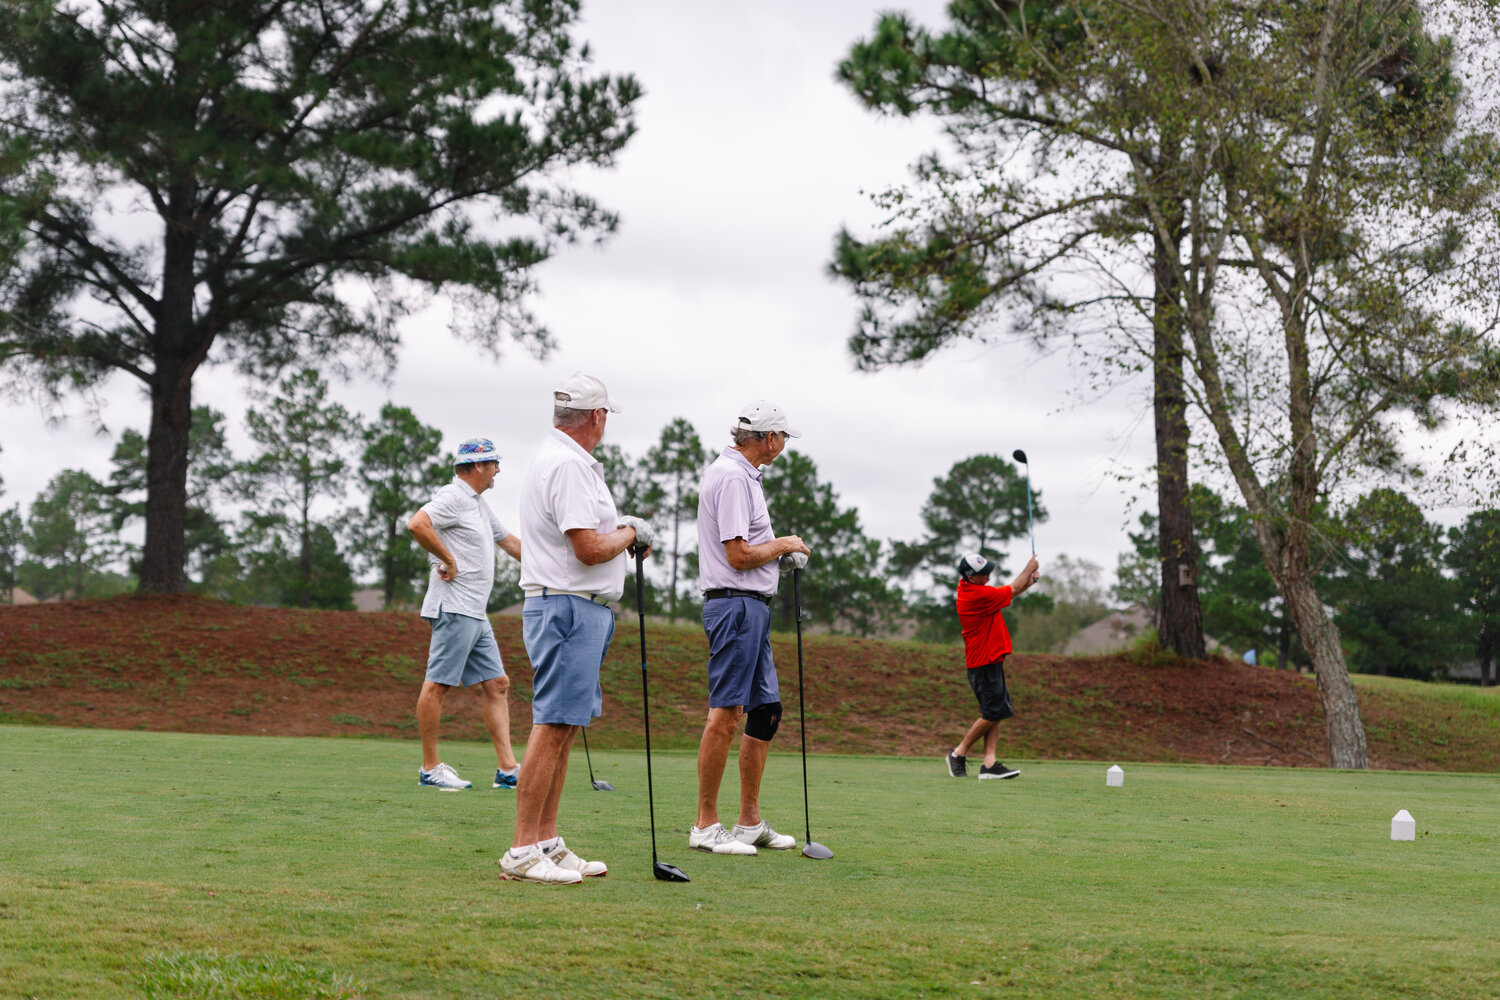 General manager of Glen Lakes Golf Club and PGA professional David Musial said the 27-hole Foley course has grown their youth organizations as well as hosted multiple collegiate tournaments within the past 10 years of being locally owned.